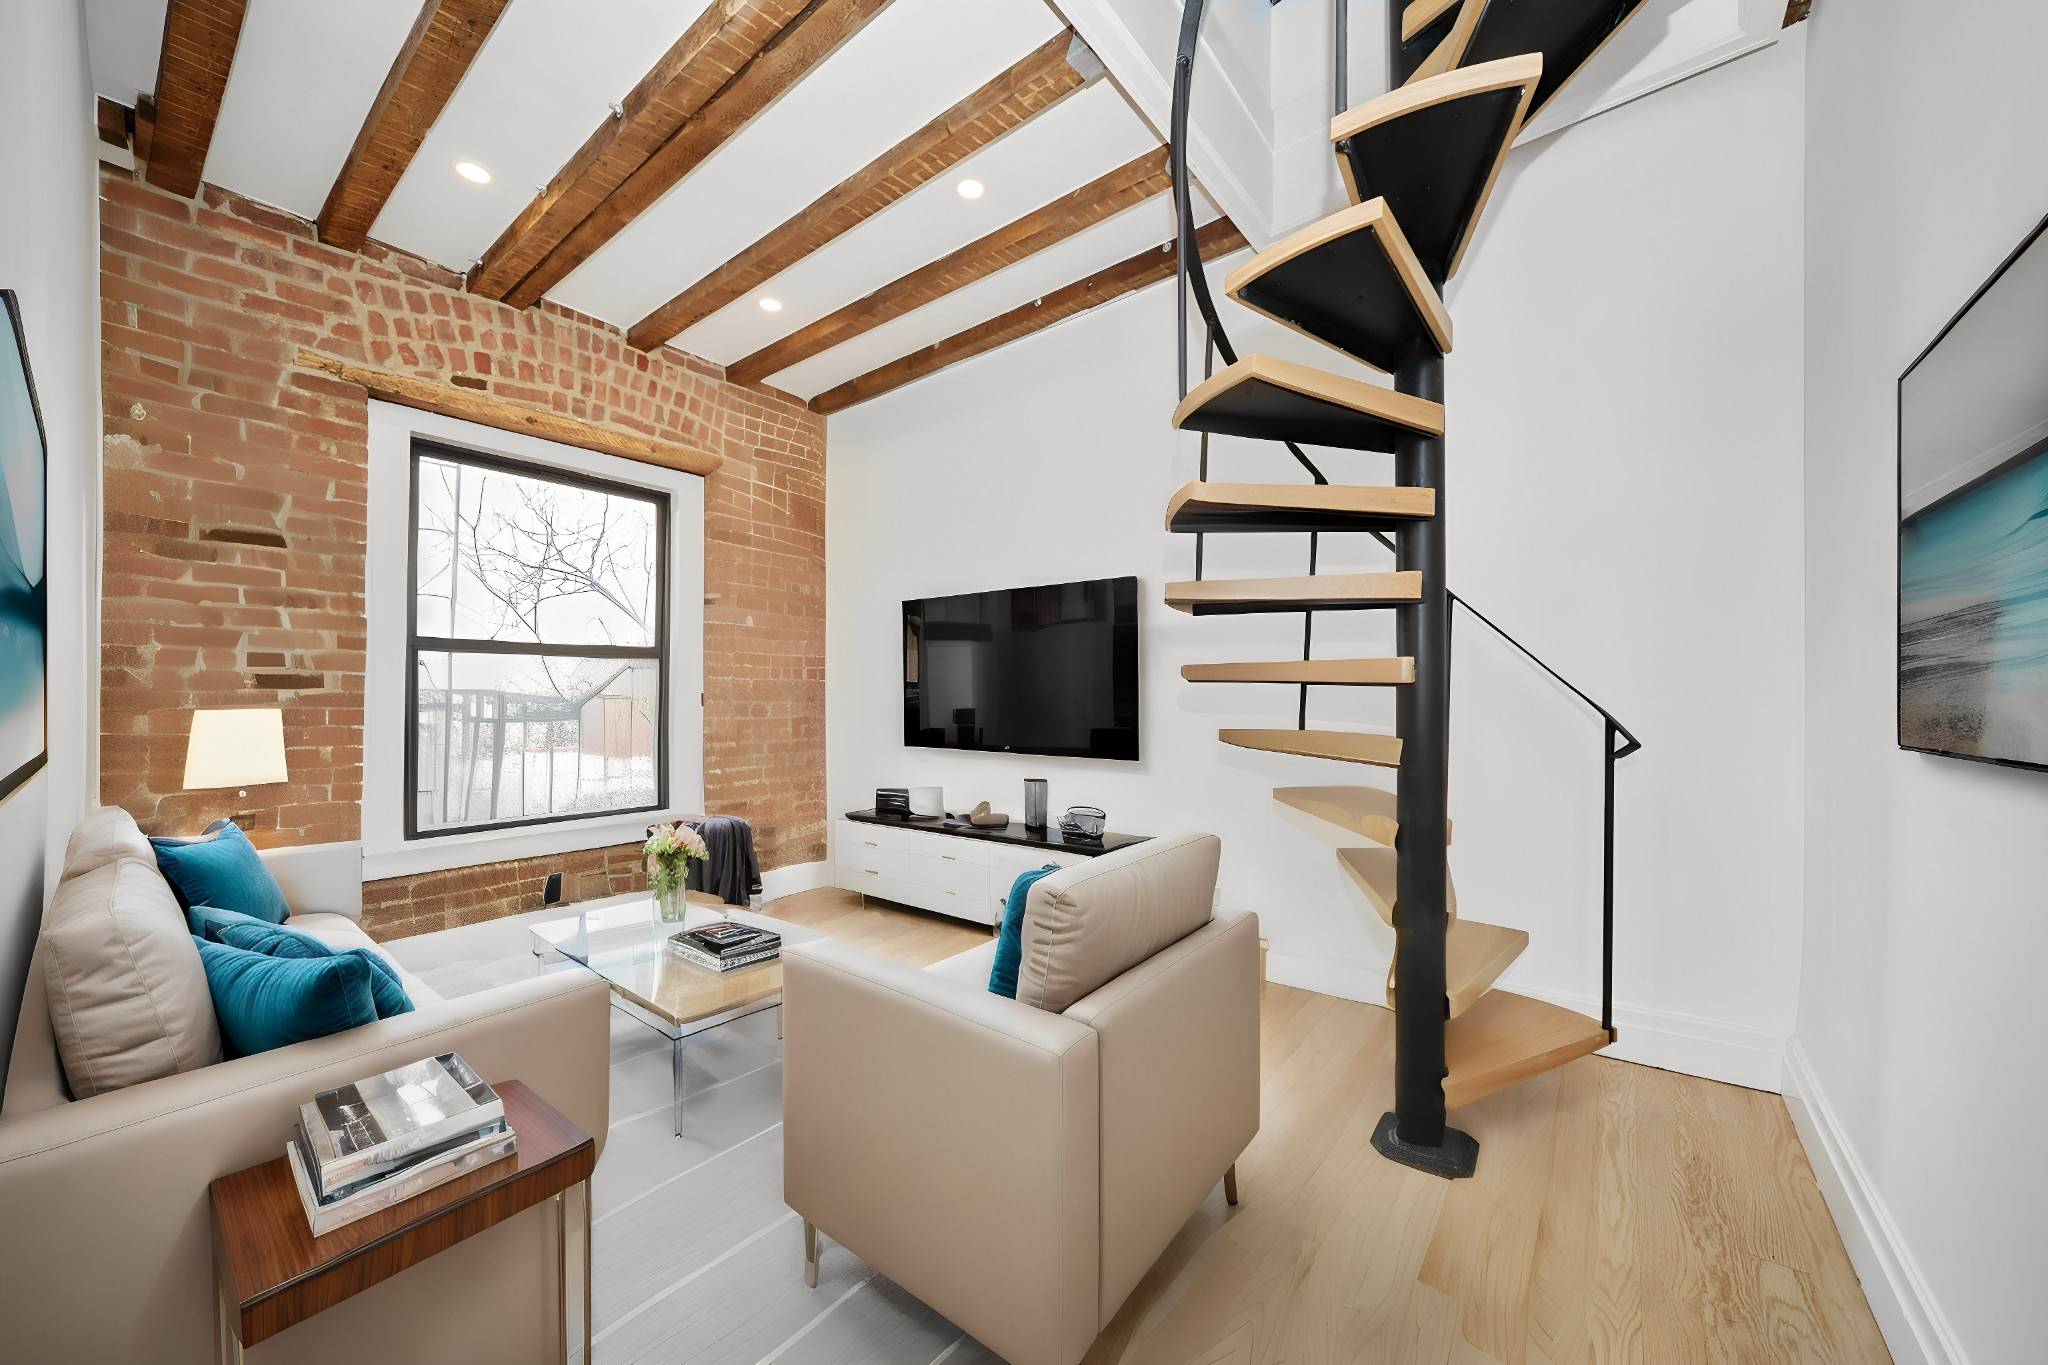 Modern 1BR in the heart of the West Village PRIVATE ROOFDECKApartment Features Washer Dryer Open kitchen w SS Appliances including Dishwasher Queen sized bedroom Marble bathroom Strip Wood Flooring Soaked ...